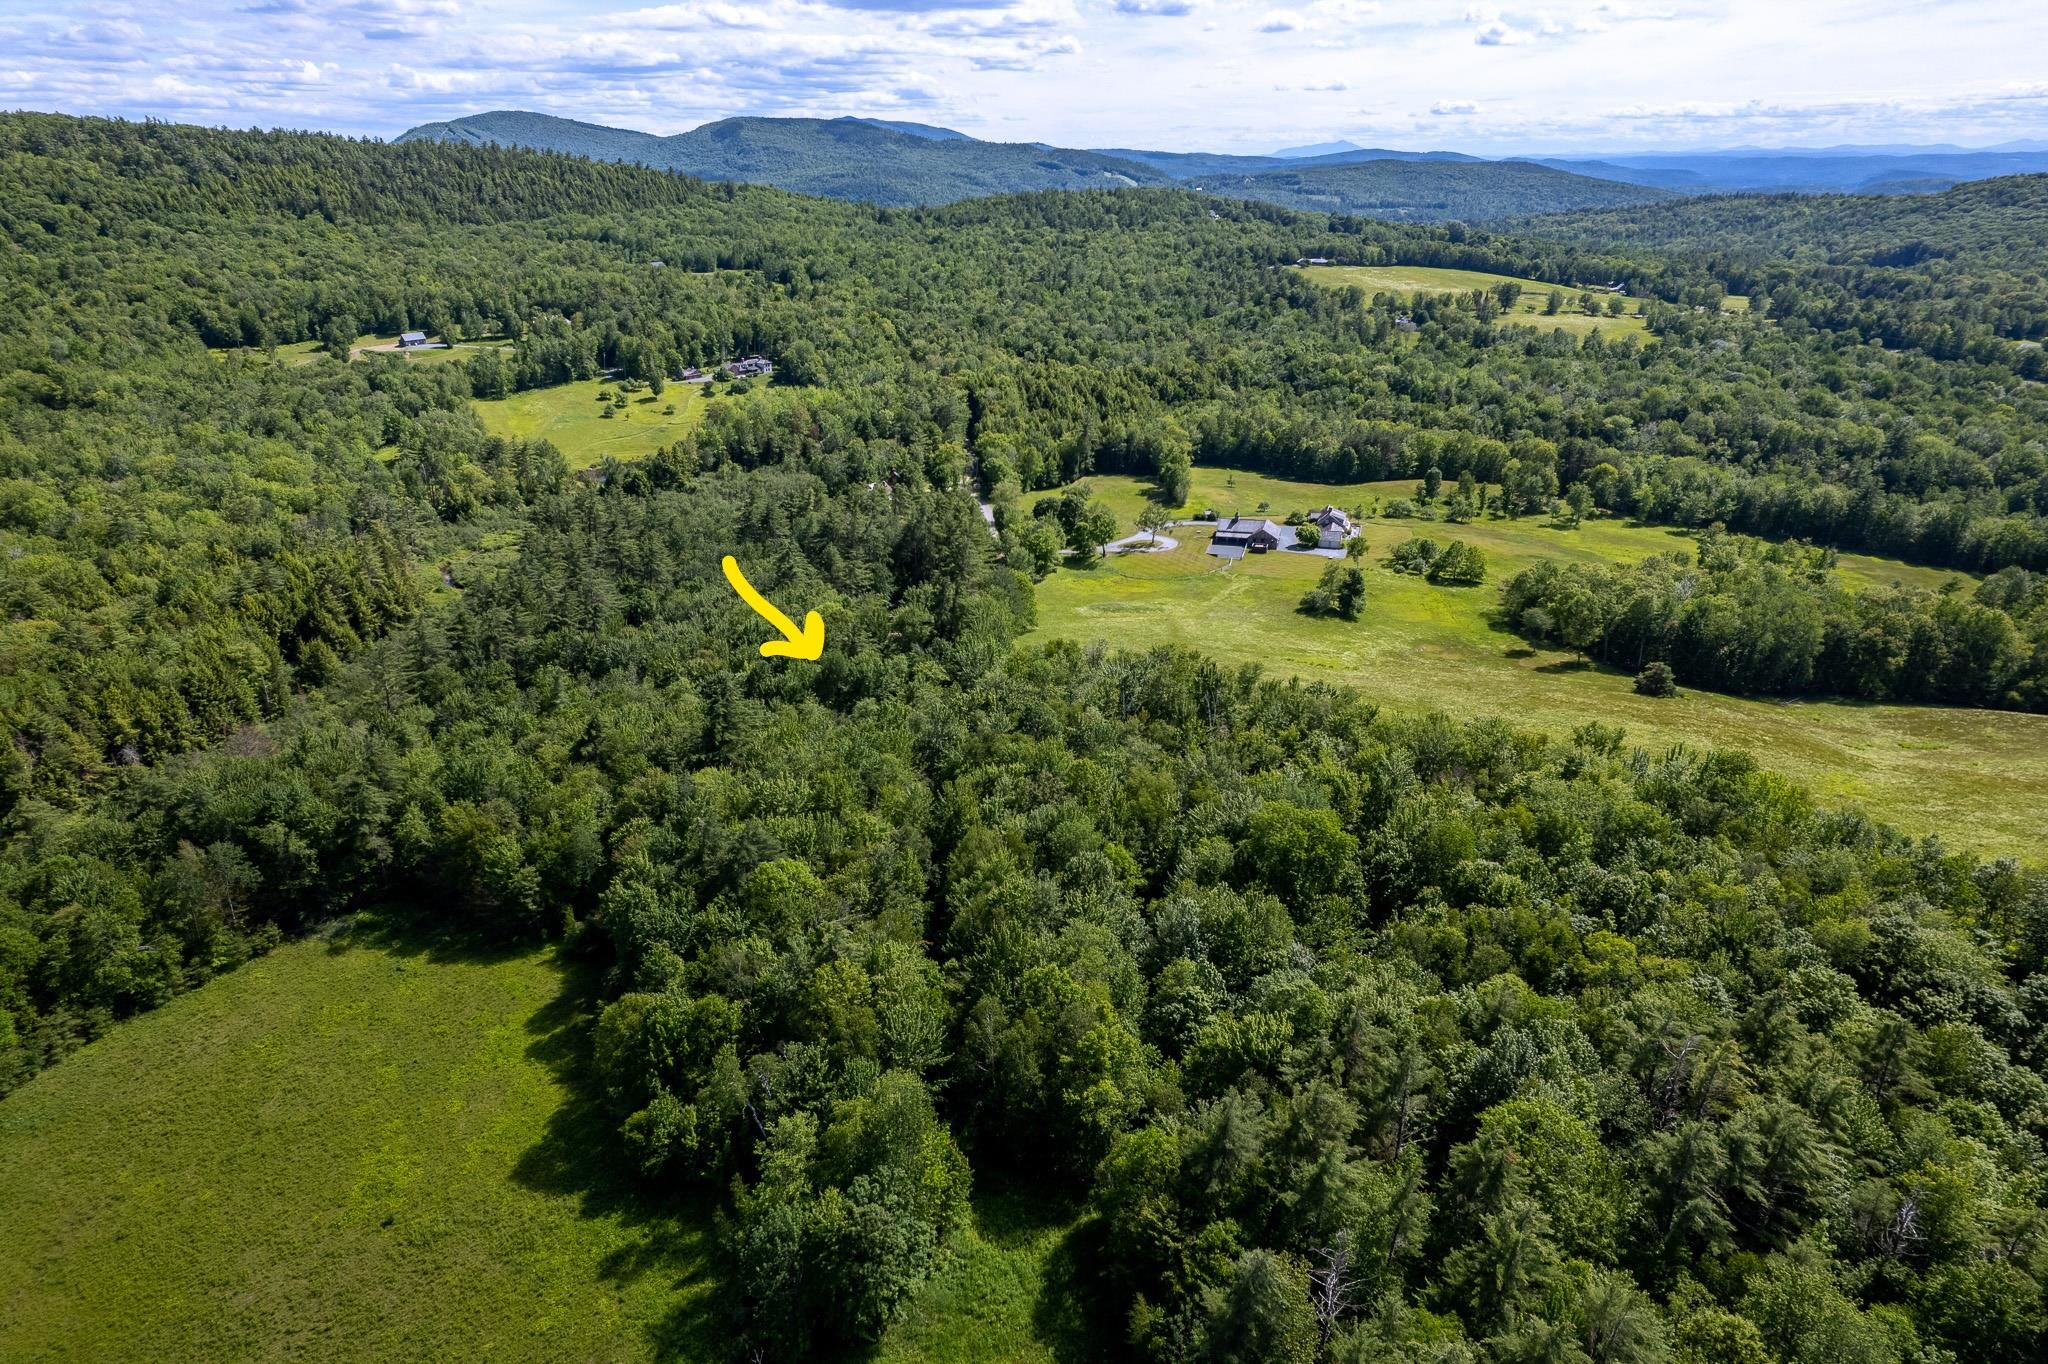 Showing house location in historic Hardscrabble area of Lyme, NH